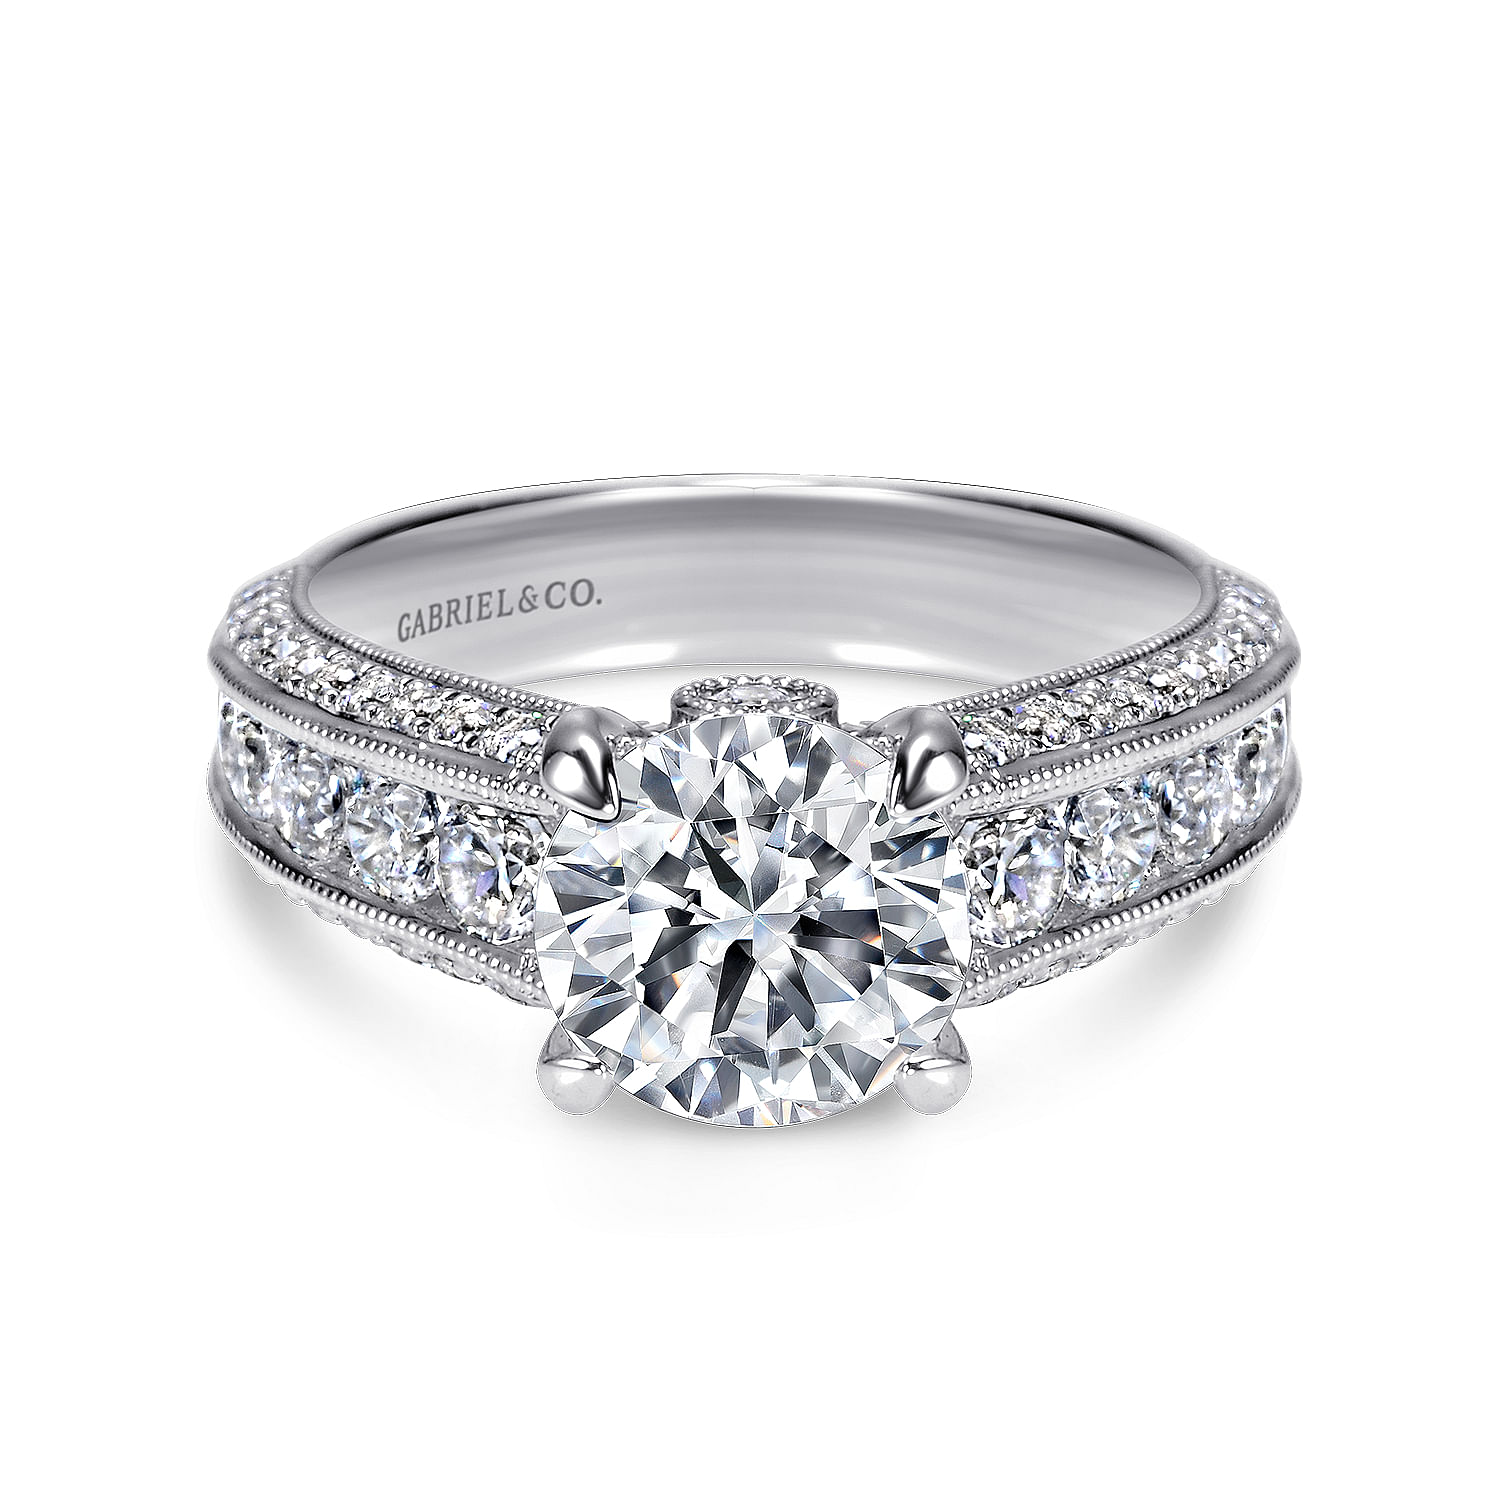 Rebecca---Vintage-Inspired-14K-White-Gold-Round-Wide-Band-Diamond-Channel-Set-Engagement-Ring1